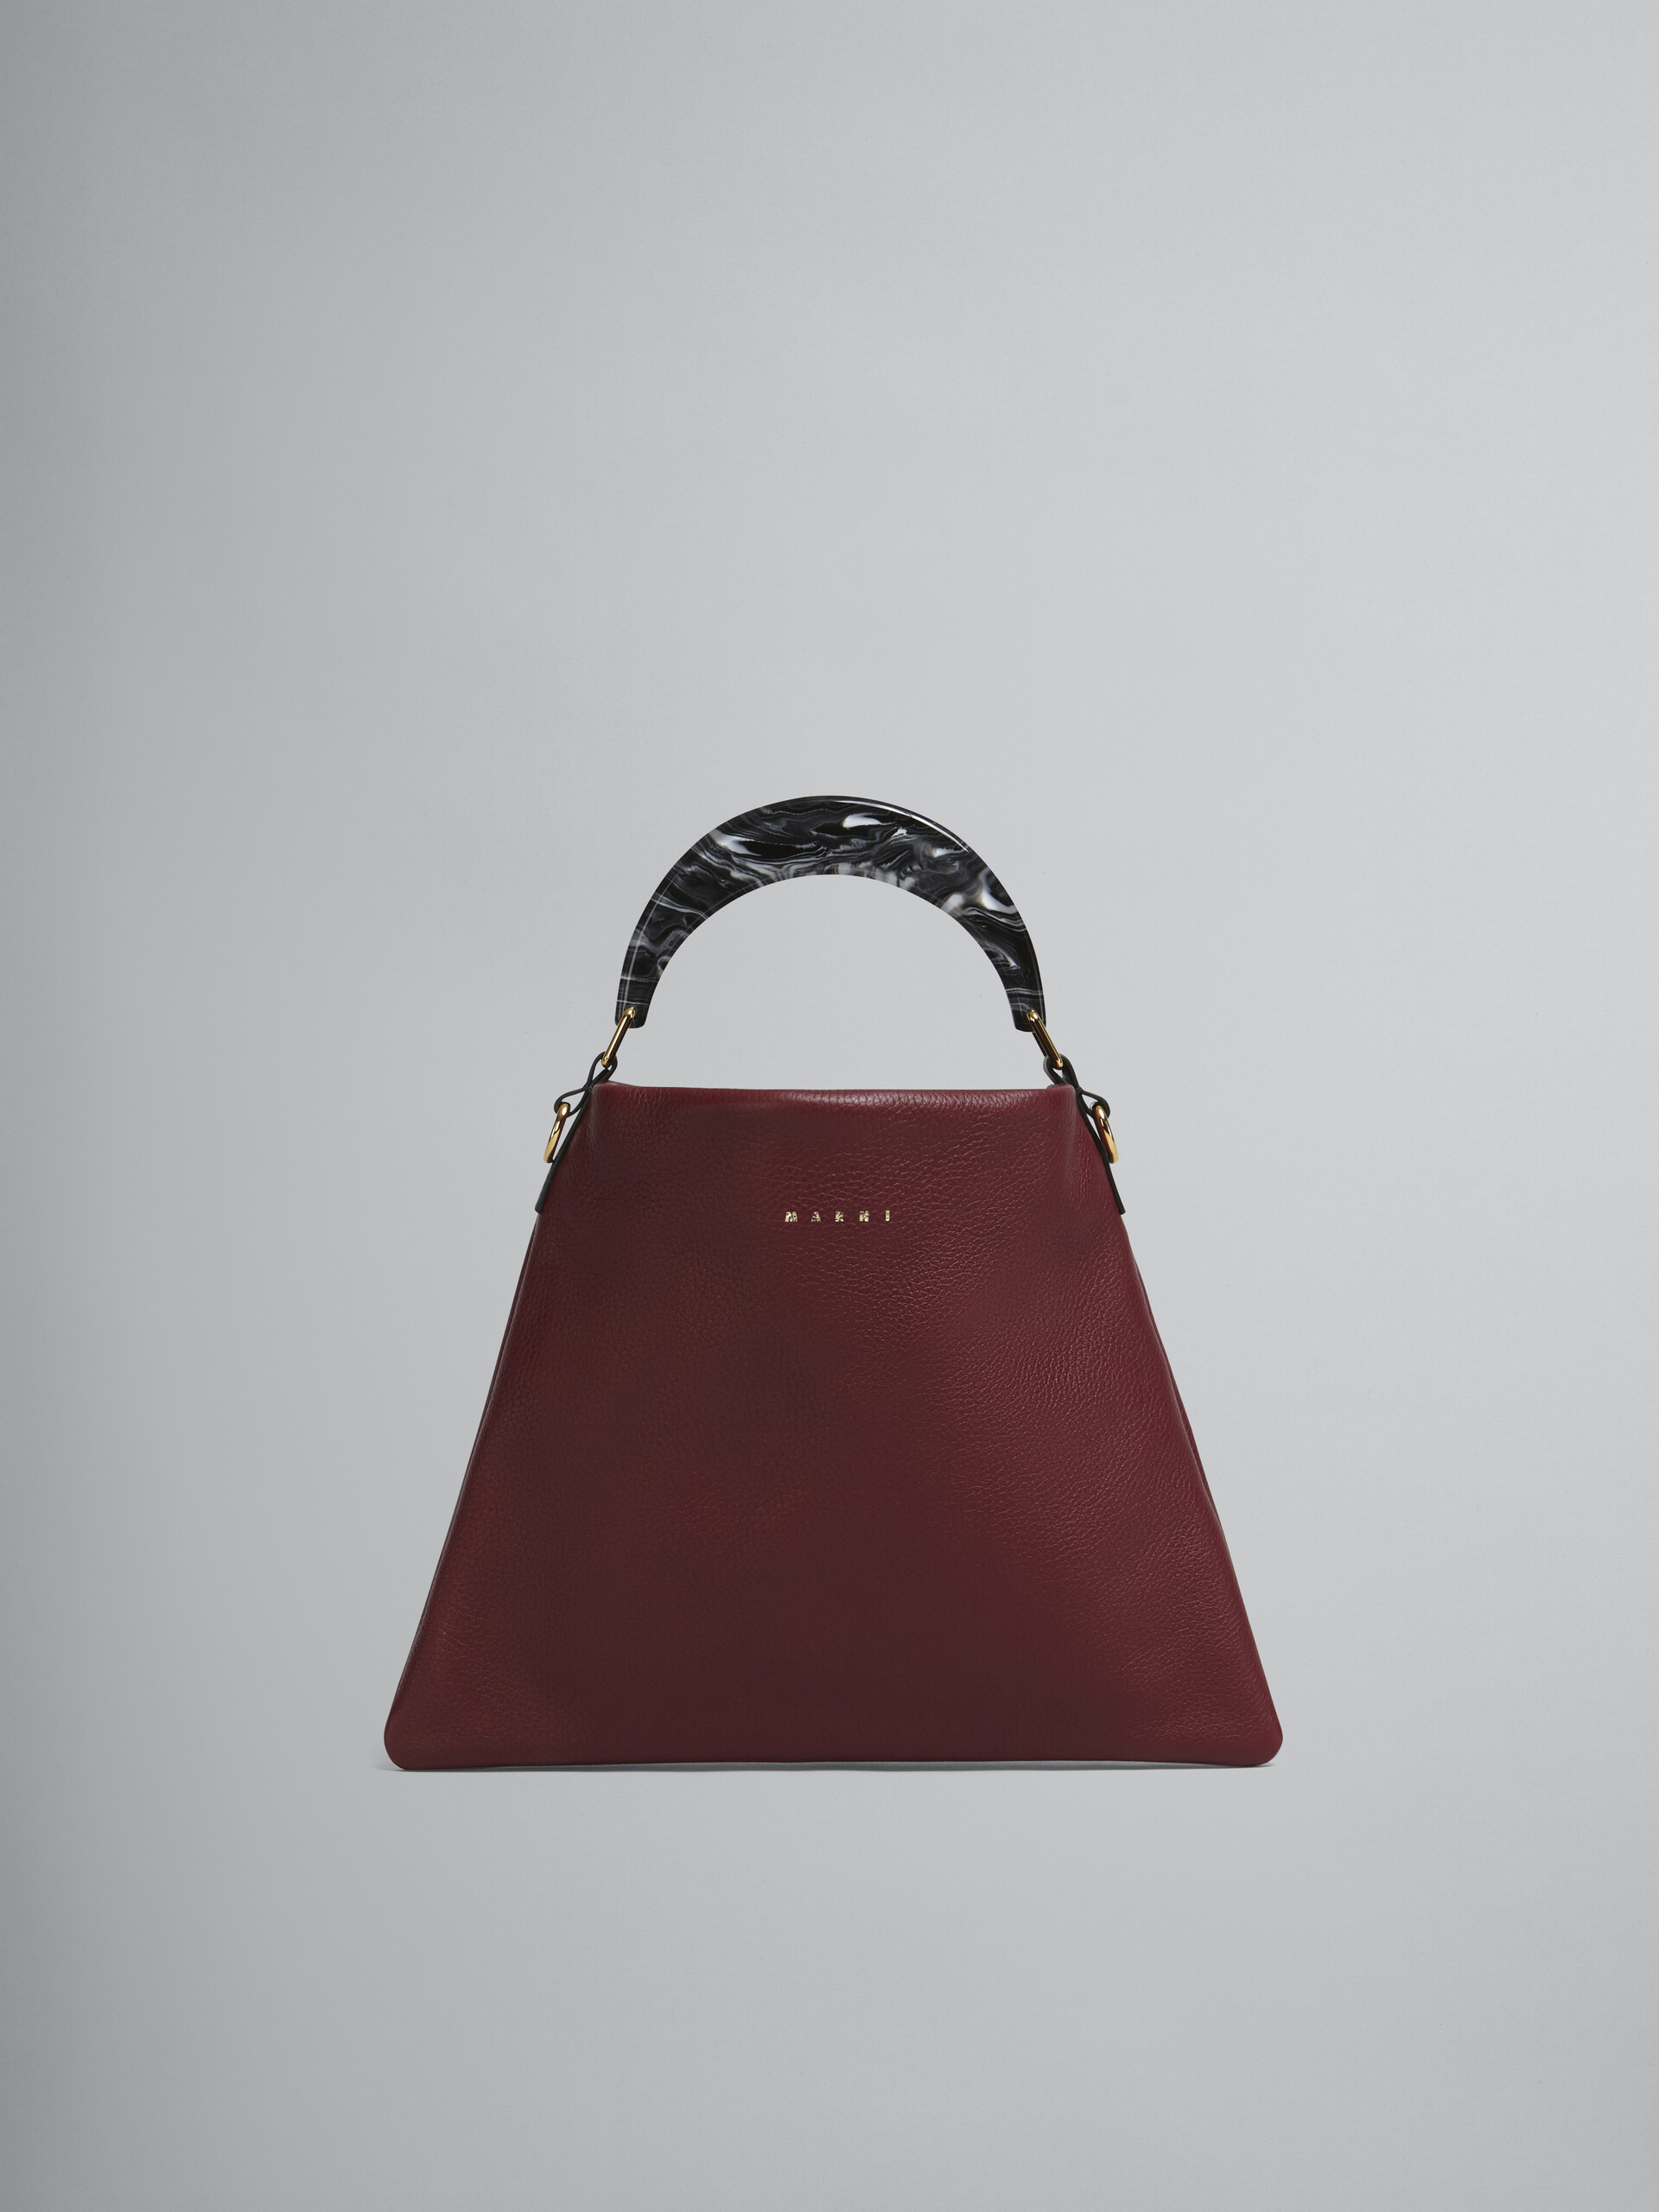 HOBO bag in red grained calfskin and resin handle - Shoulder Bags - Image 1